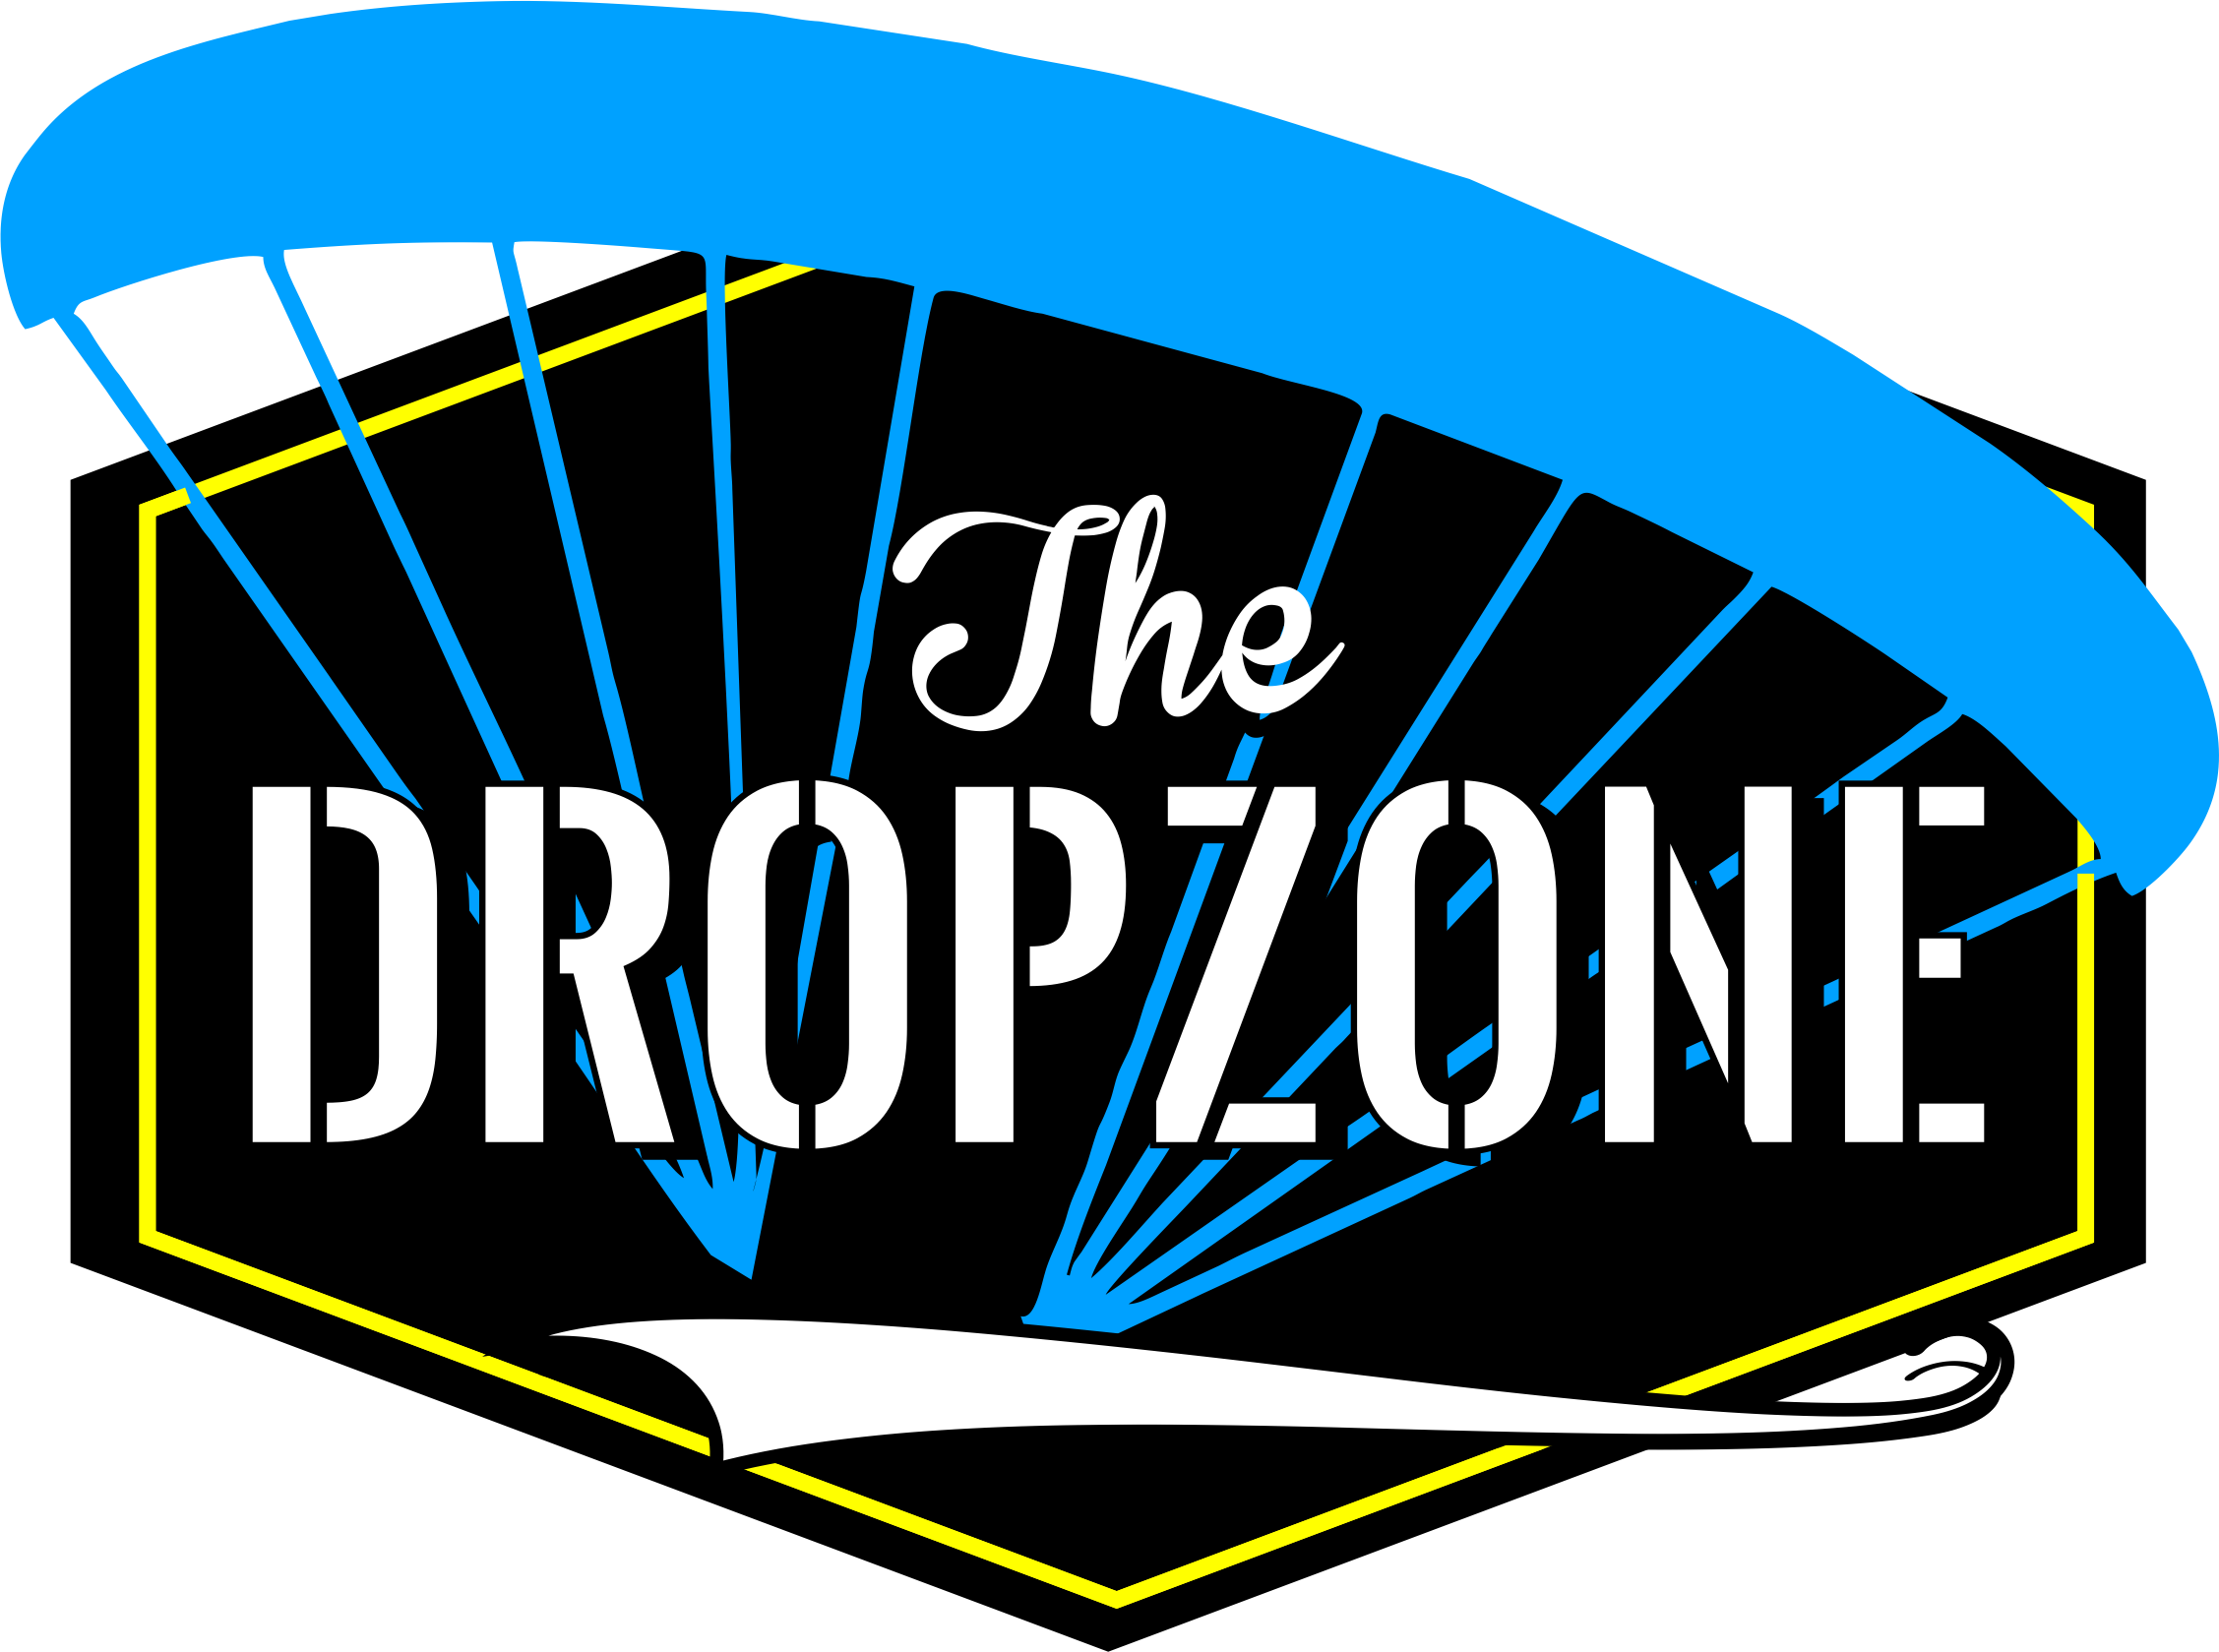 The DropZone Cafe & Bar at Tower Links